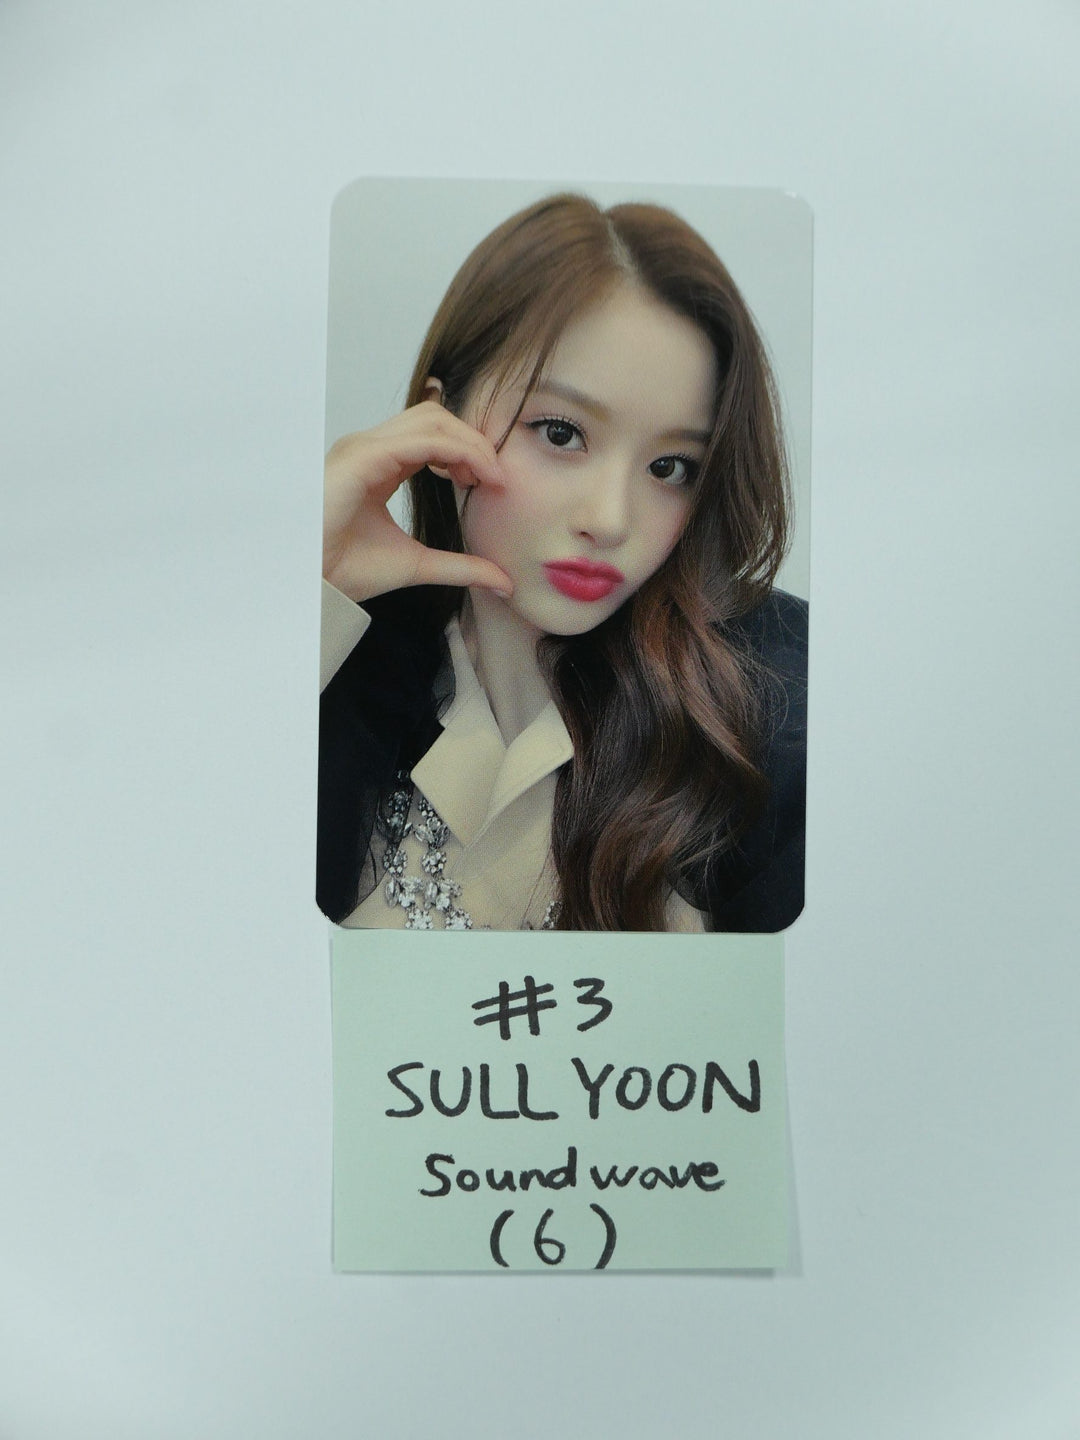 NMIXX 'AD MARE' 1st Single - Soundwave Fansign Event Photocard Round 2